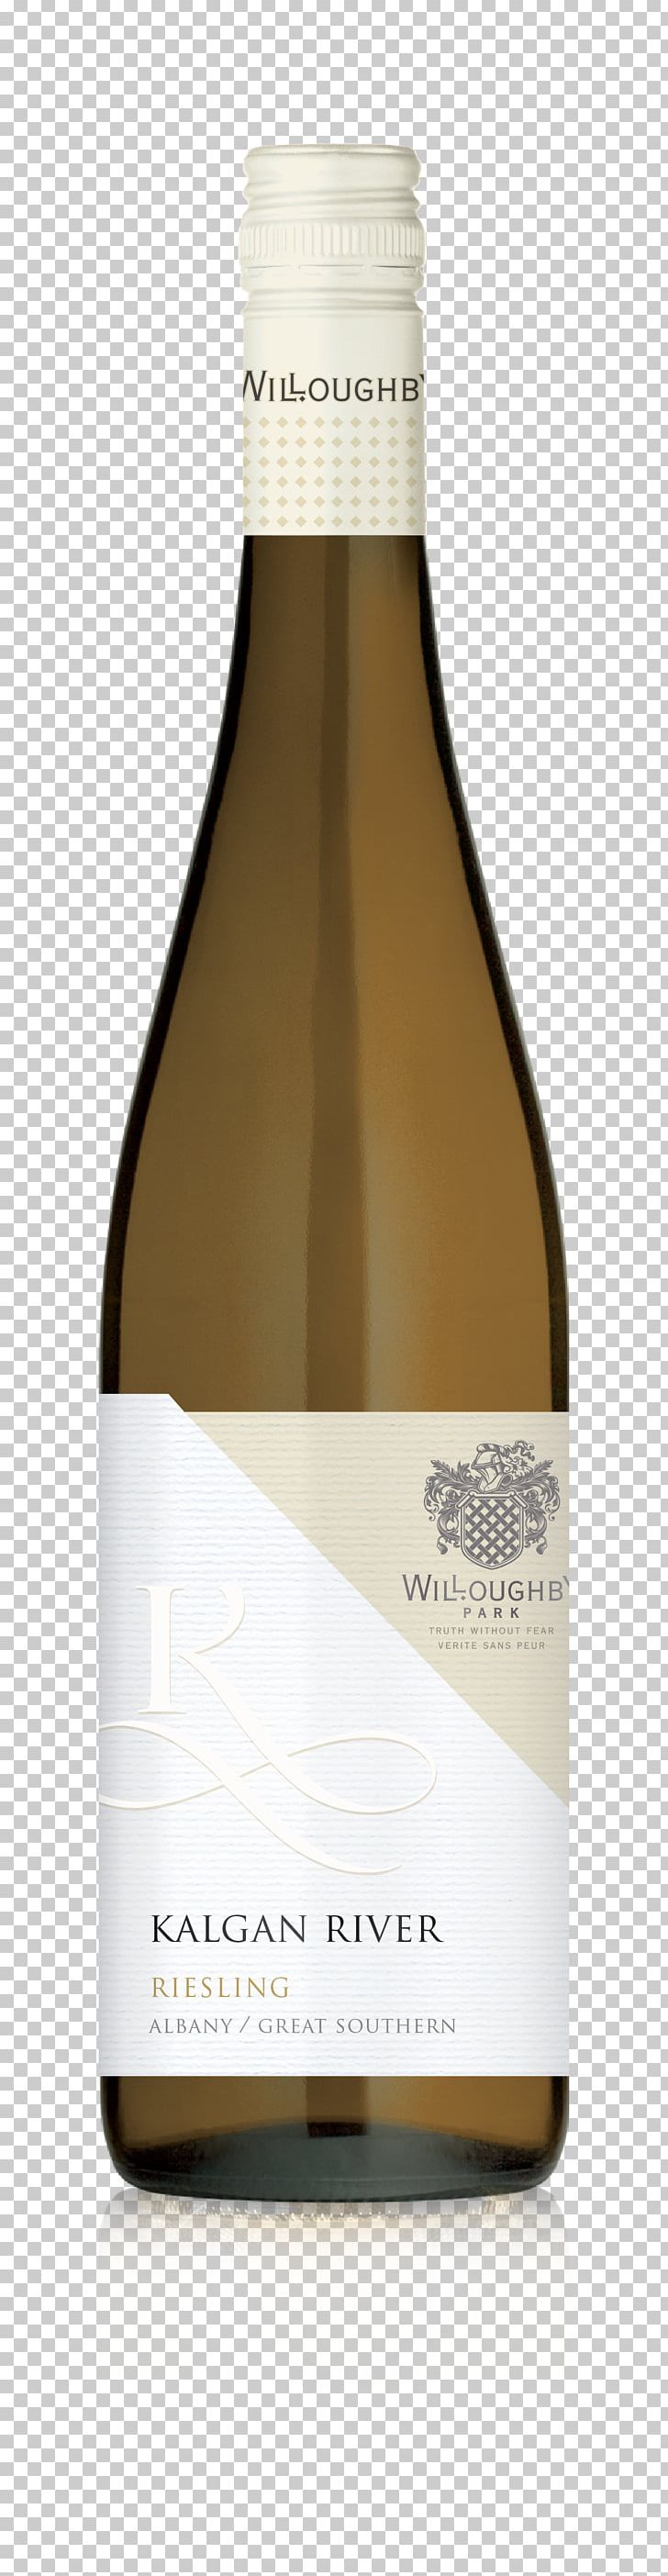 Champagne Martin Ray Winery Russian River Valley AVA Chardonnay PNG, Clipart, Alcoholic Beverage, Beer Bottle, Bottle, Champagne, Chardonnay Free PNG Download